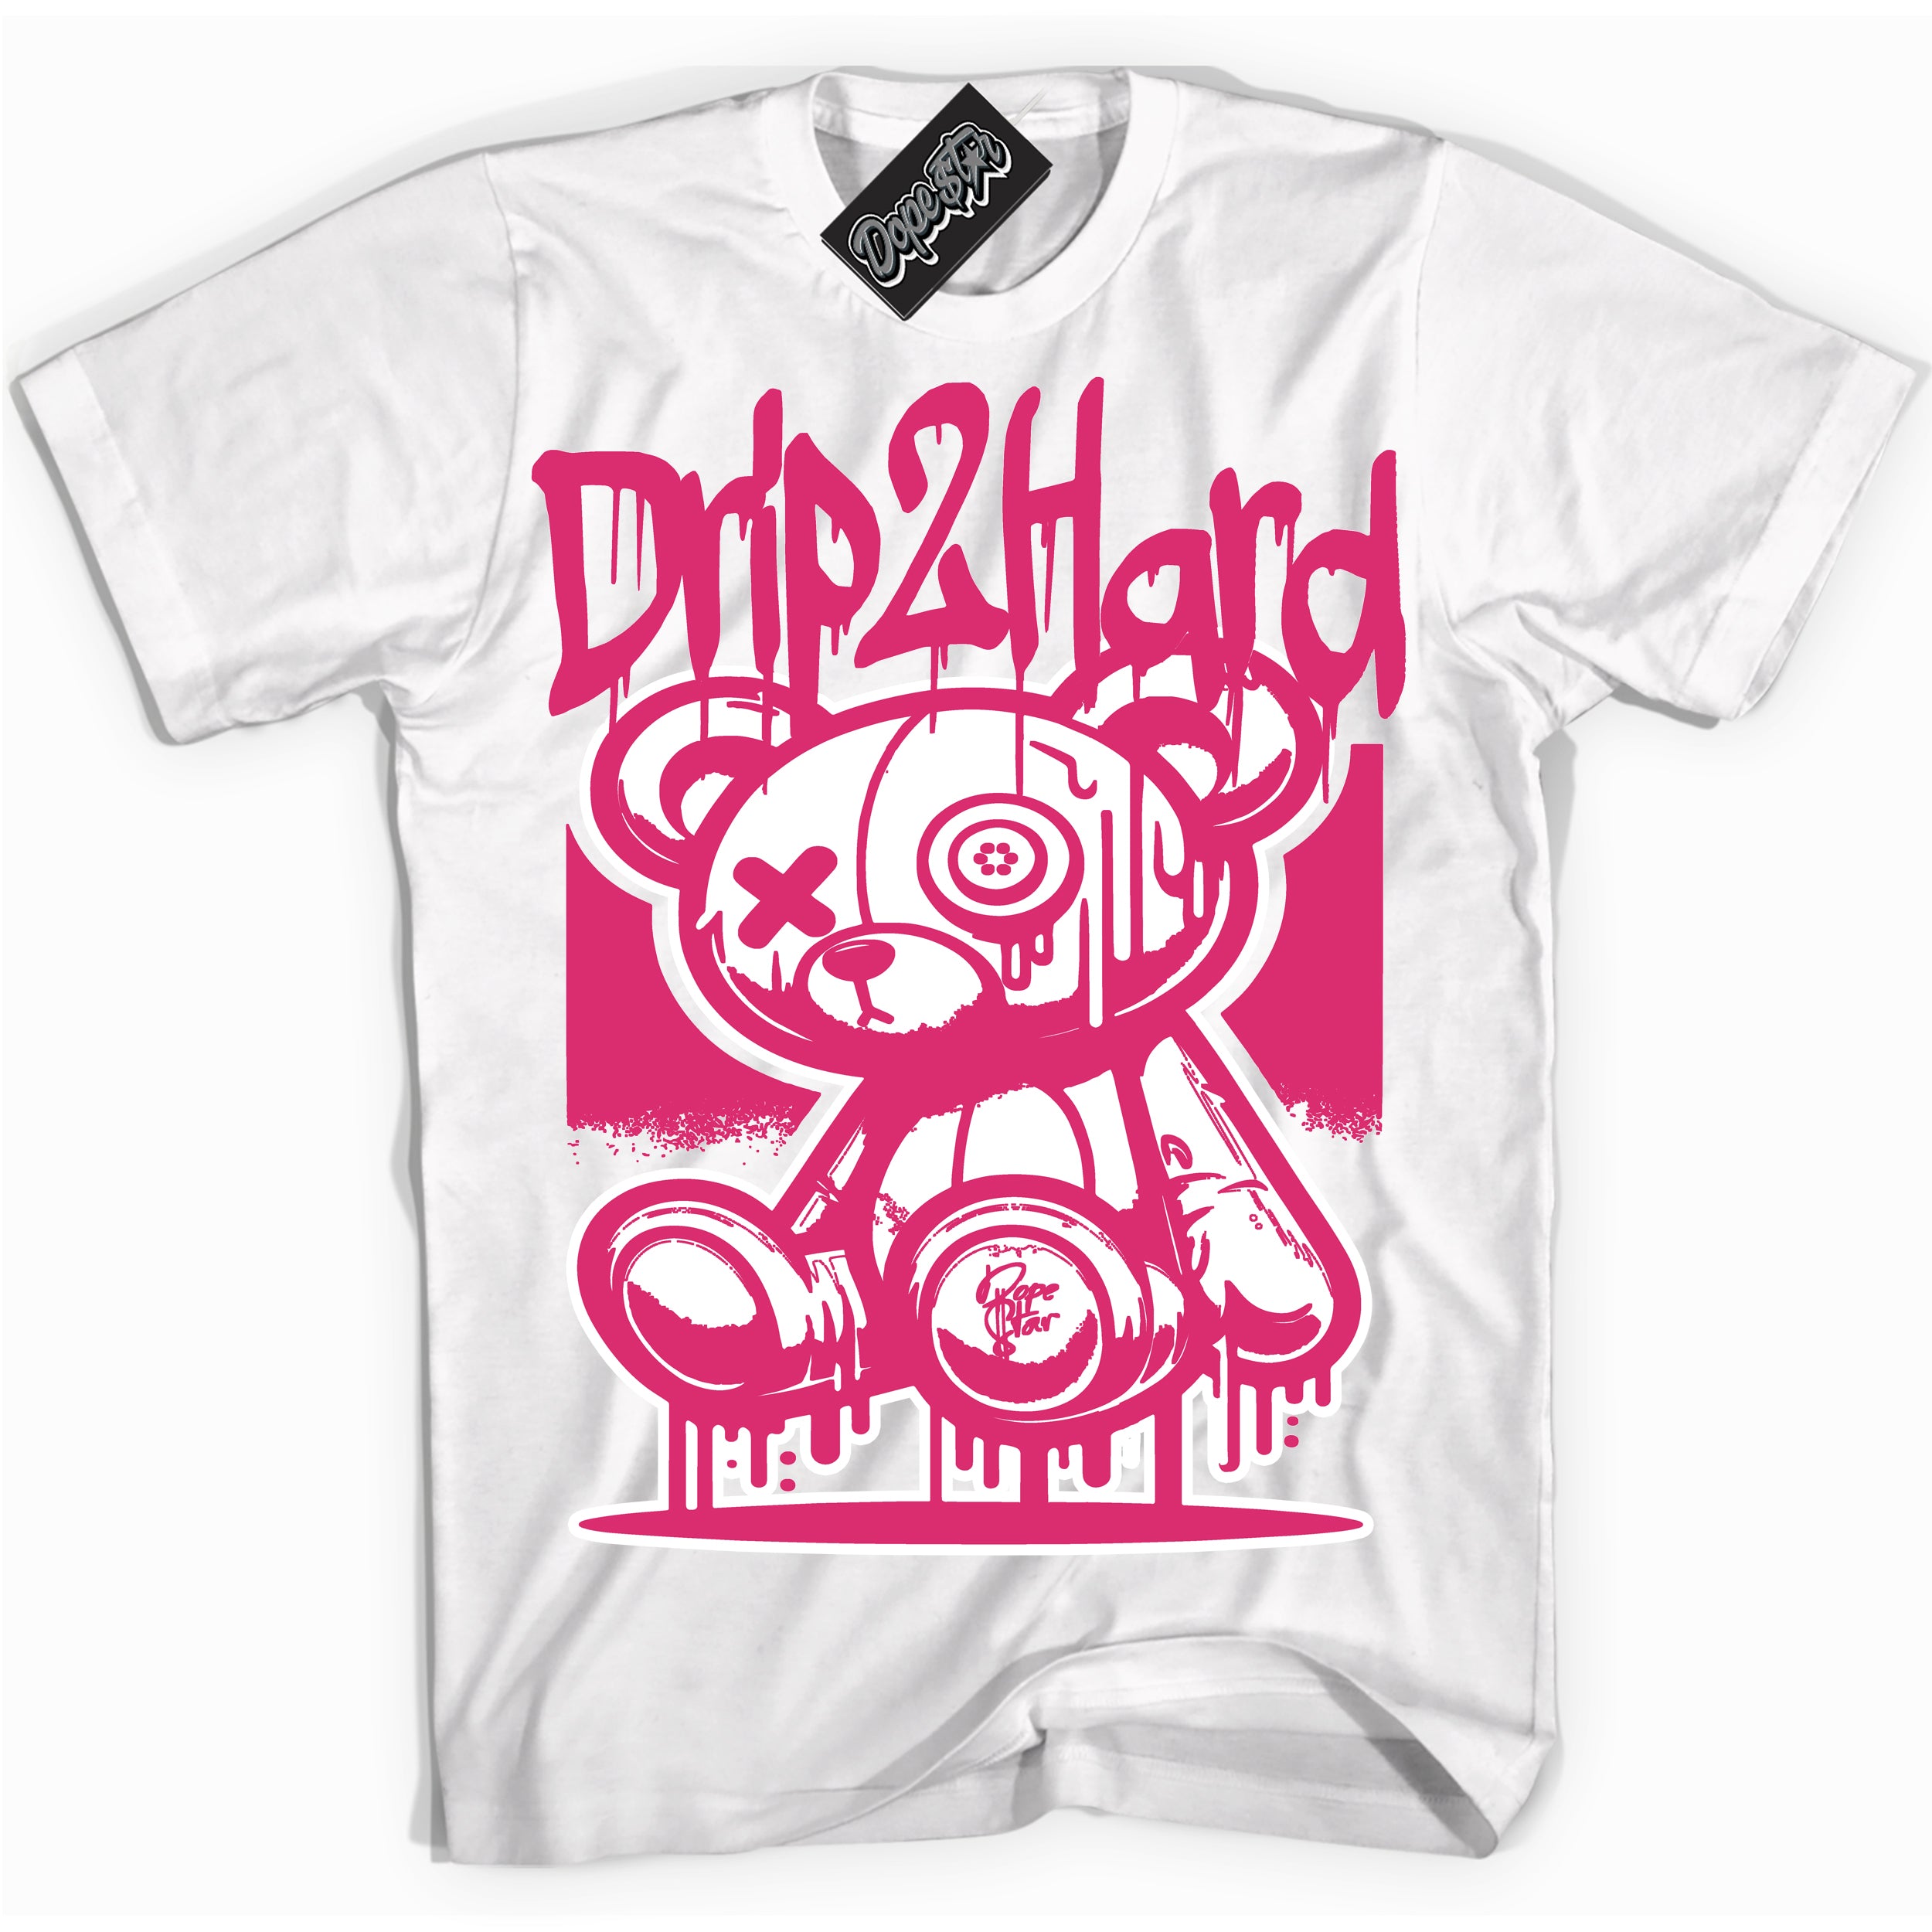 Cool White graphic tee with “ Drip 2 Hard ” design, that perfectly matches Pink Prime